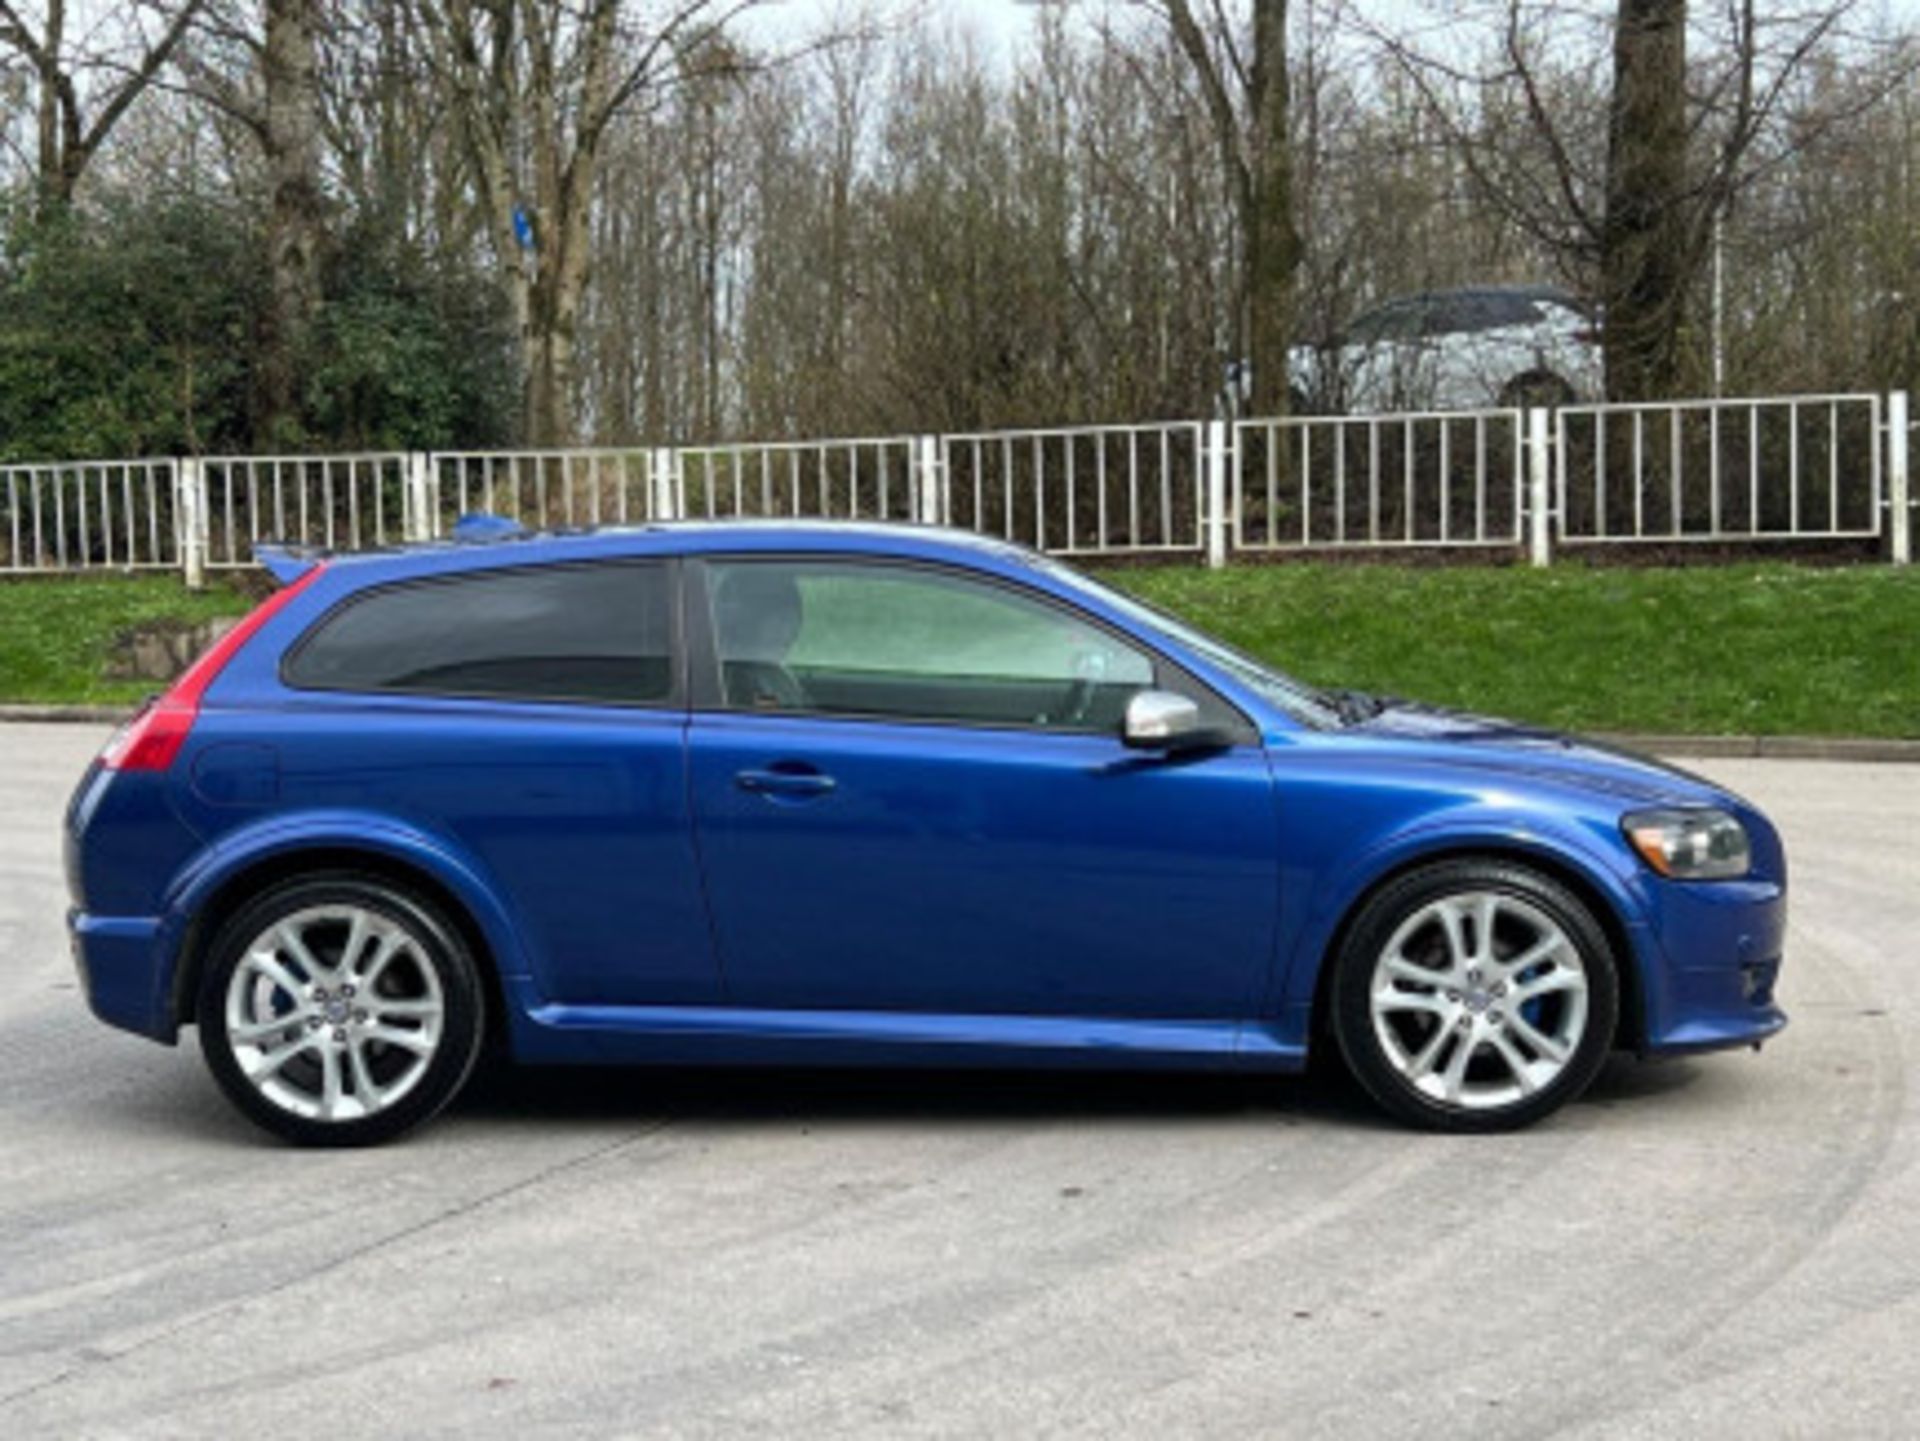 VOLVO C30 2.0D R-DESIGN SPORT 2DR - SPORTY AND LUXURIOUS COMPACT CAR >>--NO VAT ON HAMMER--<< - Image 39 of 103